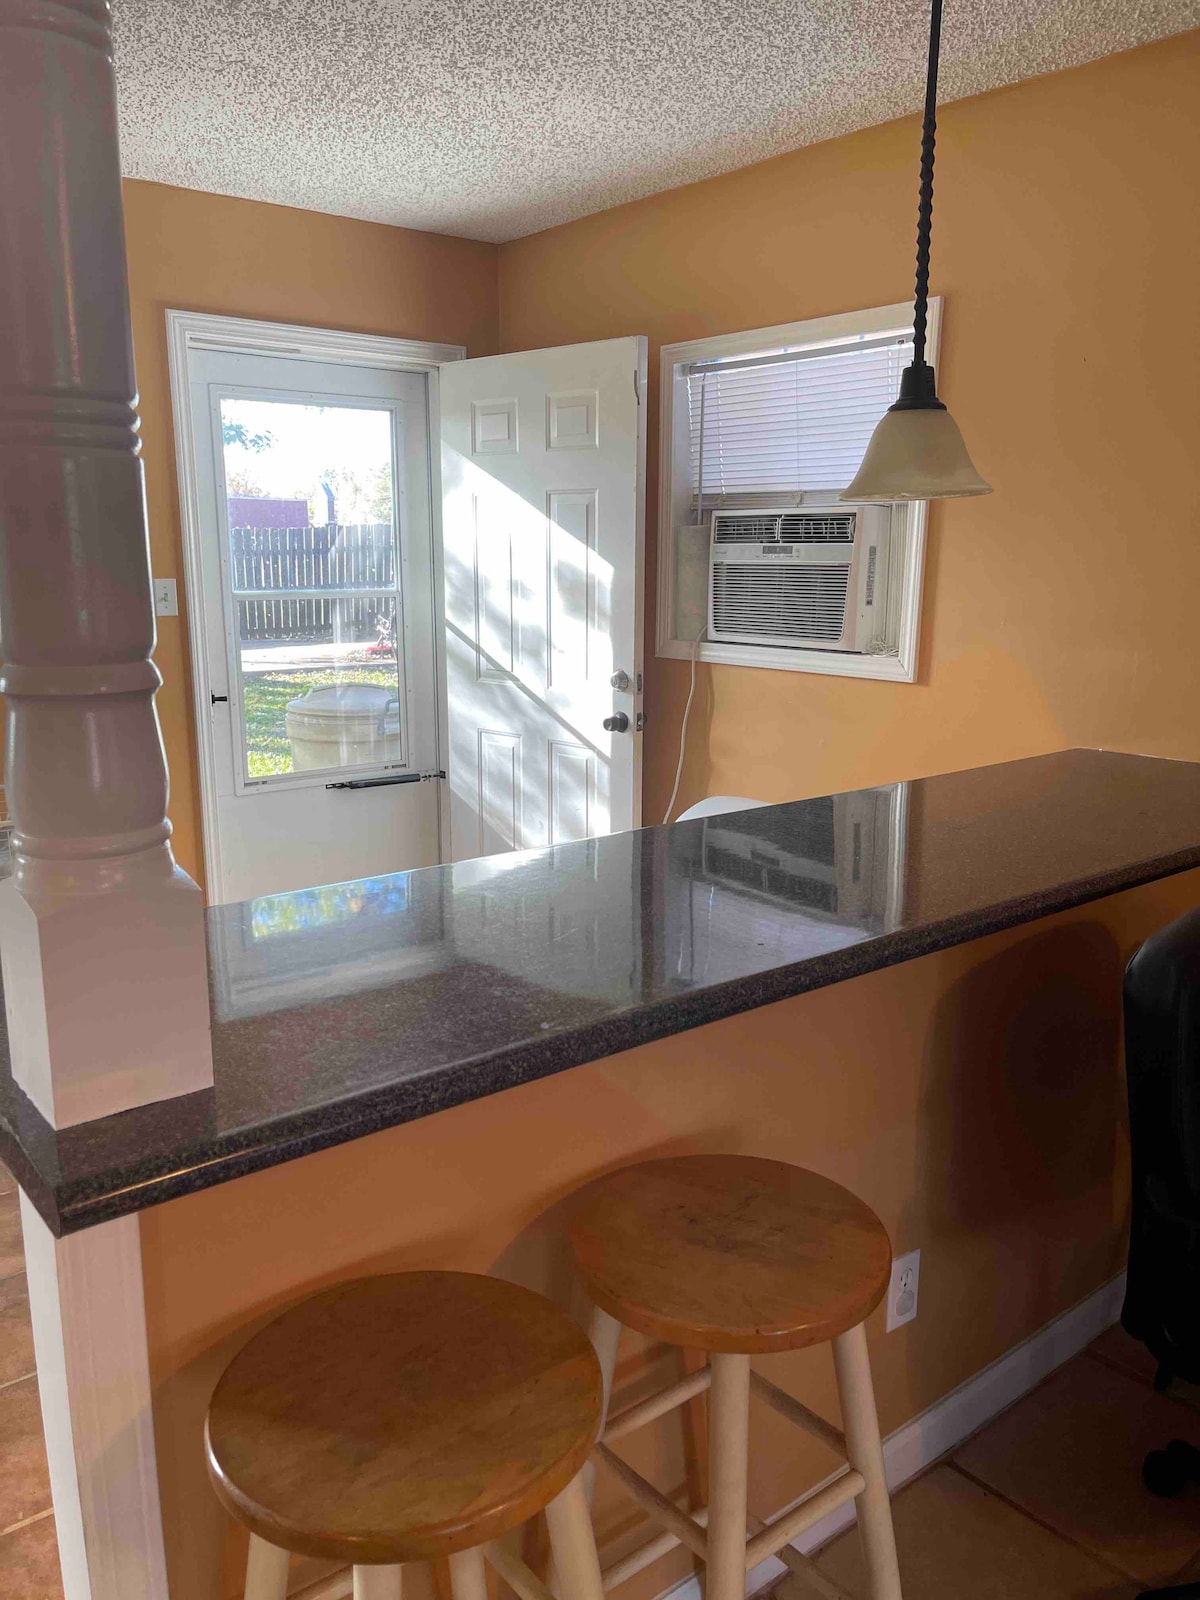 Room to Relax, spacious 1 Bedroom, Washer/Dryer,